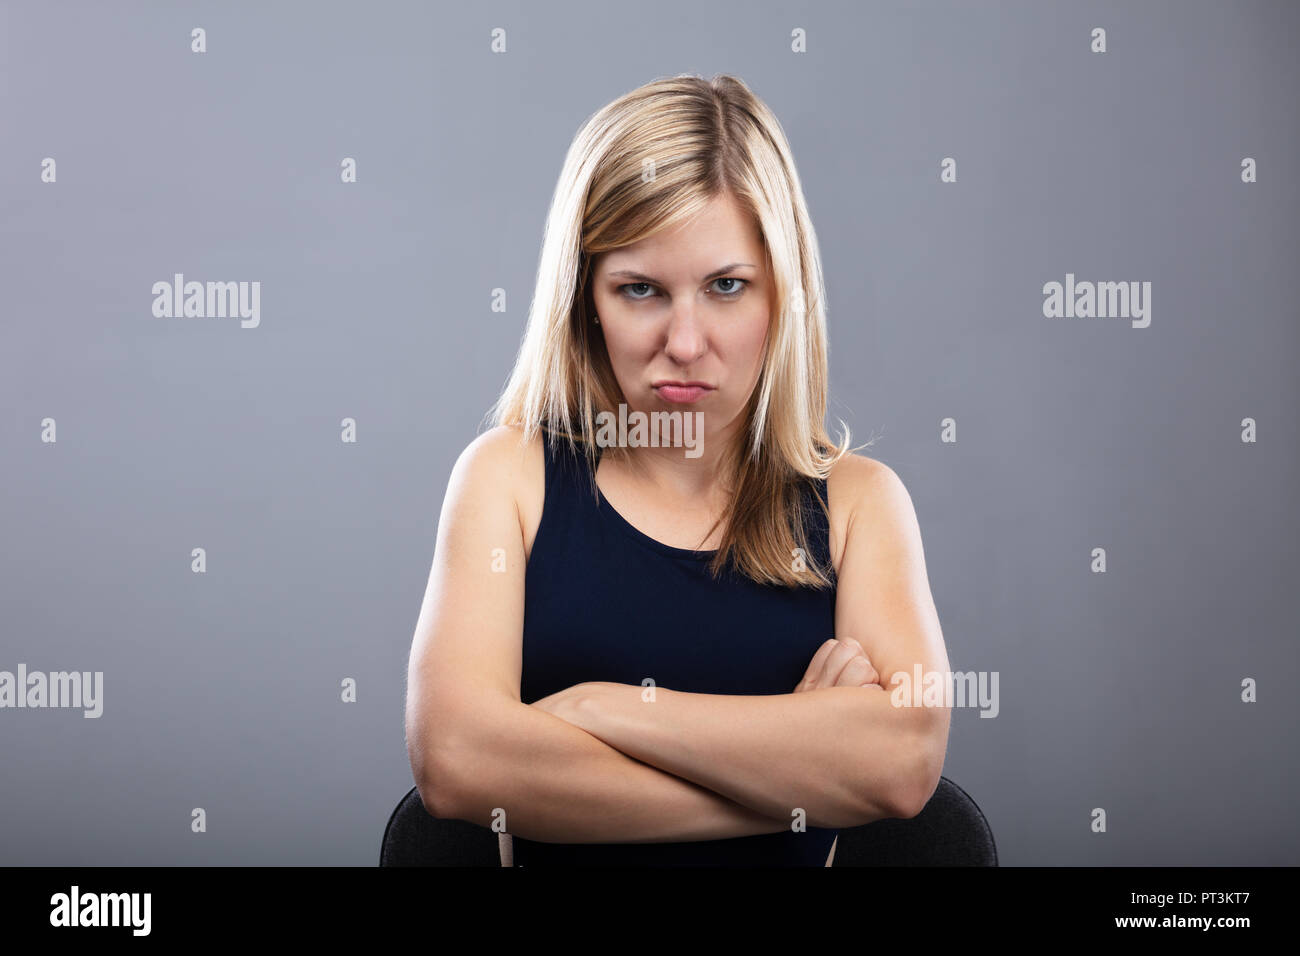 Portrait Of A Angry Young Woman With Folded Arms Stock Photo